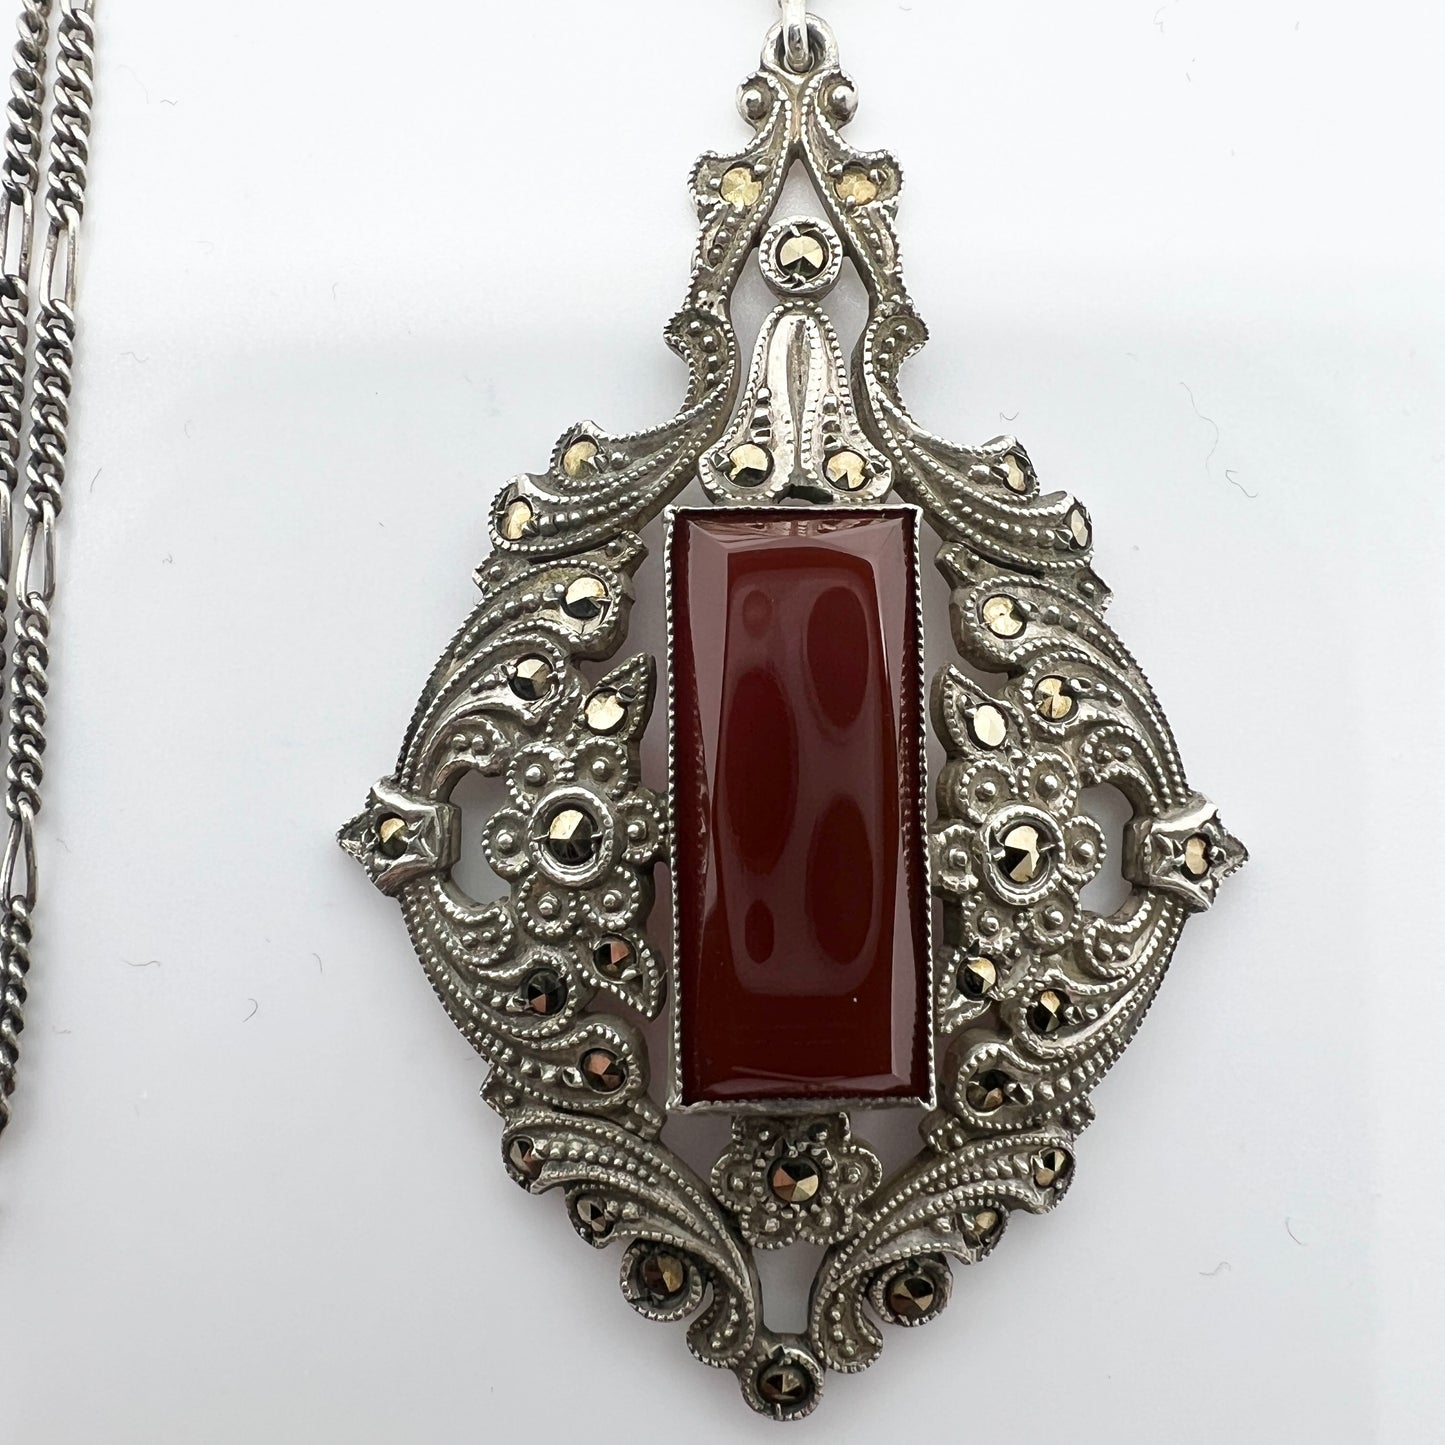 Austria / Germany Early 1900s. Sterling 935 Silver Carnelian Marcasite Necklace.